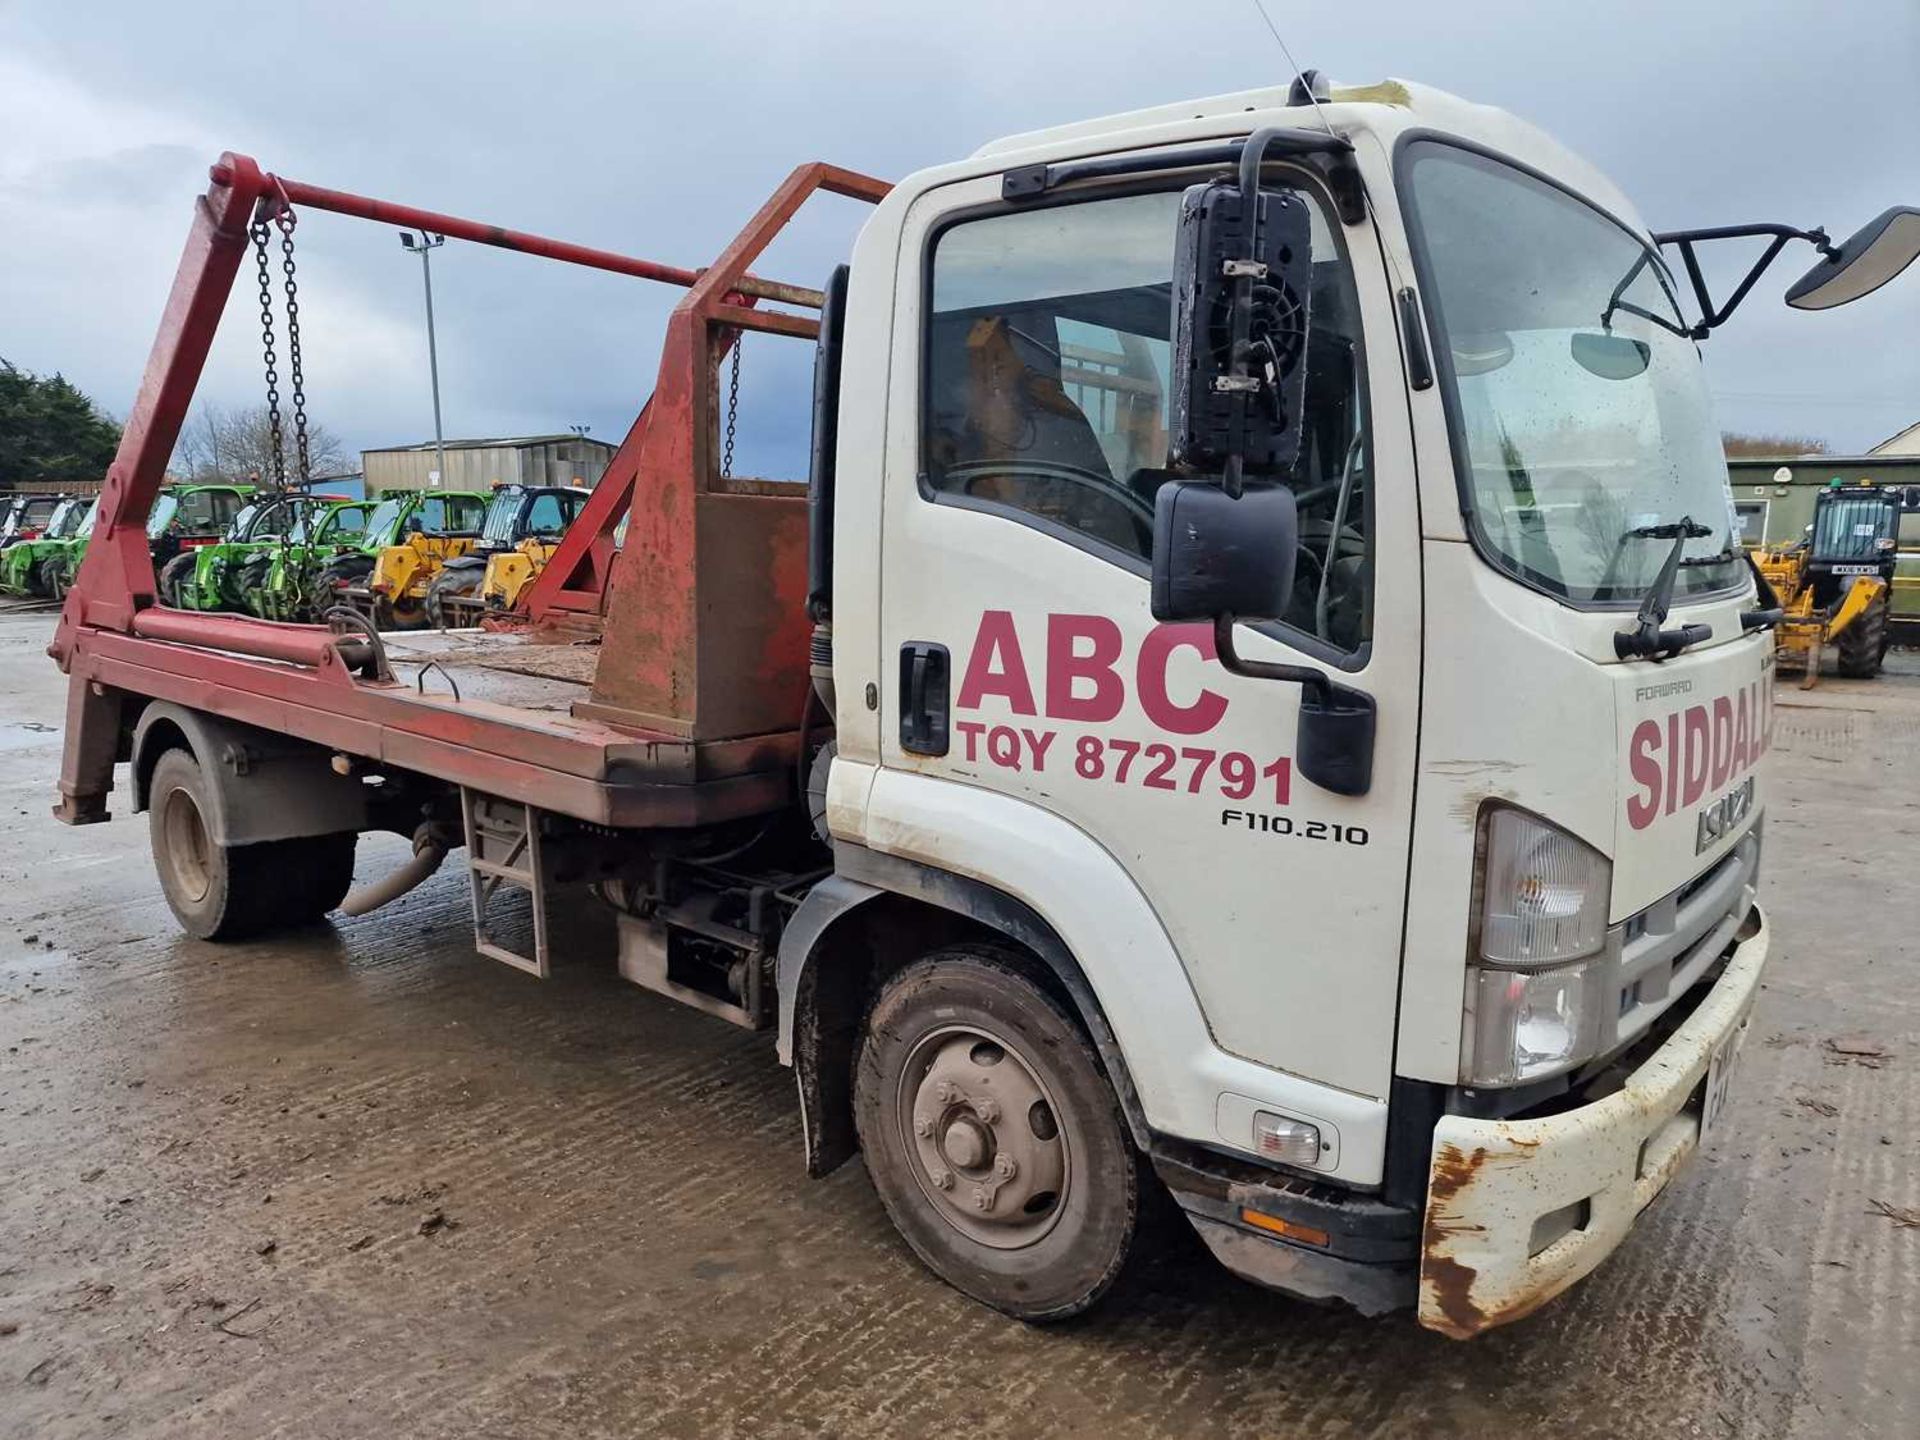 2011 Isuzu F110.210 4x2 Skip Loader Lorry, Extendable Arms, Automatic Gear Box (Reg. Docs. Available - Image 8 of 21